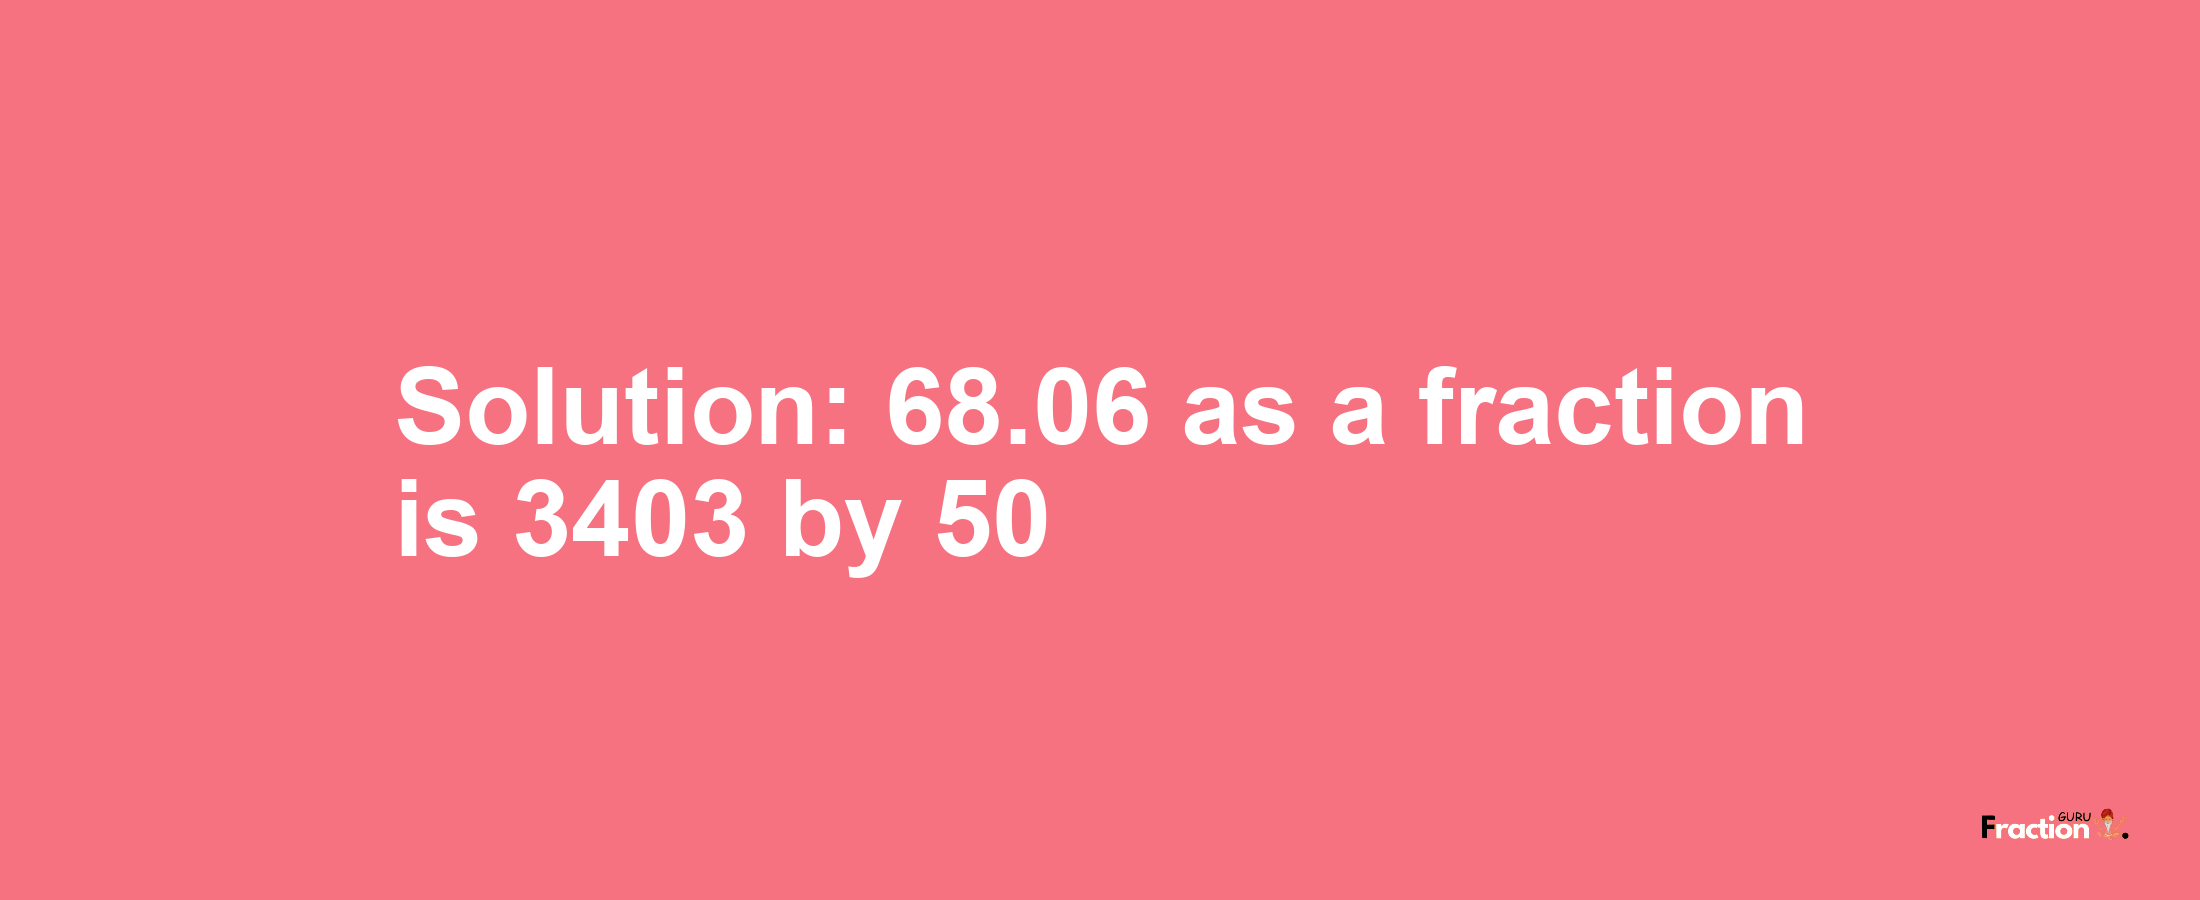 Solution:68.06 as a fraction is 3403/50